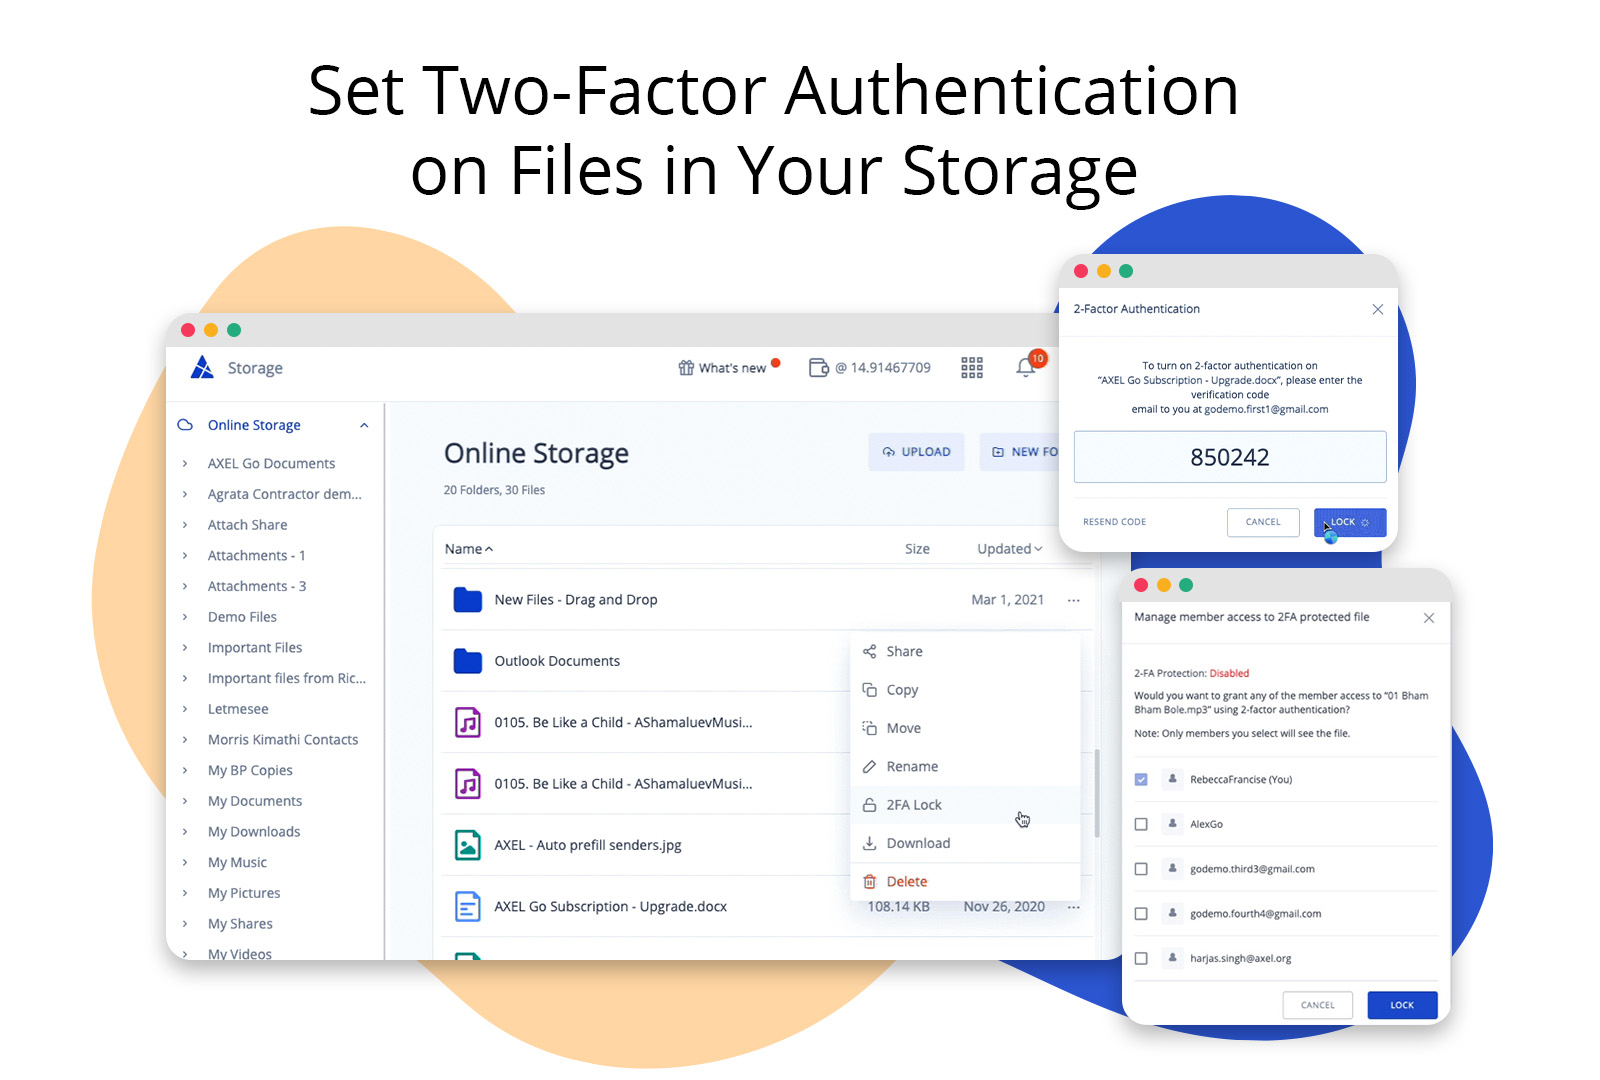 Set Two-Factor Authentication on Files in Your Storage